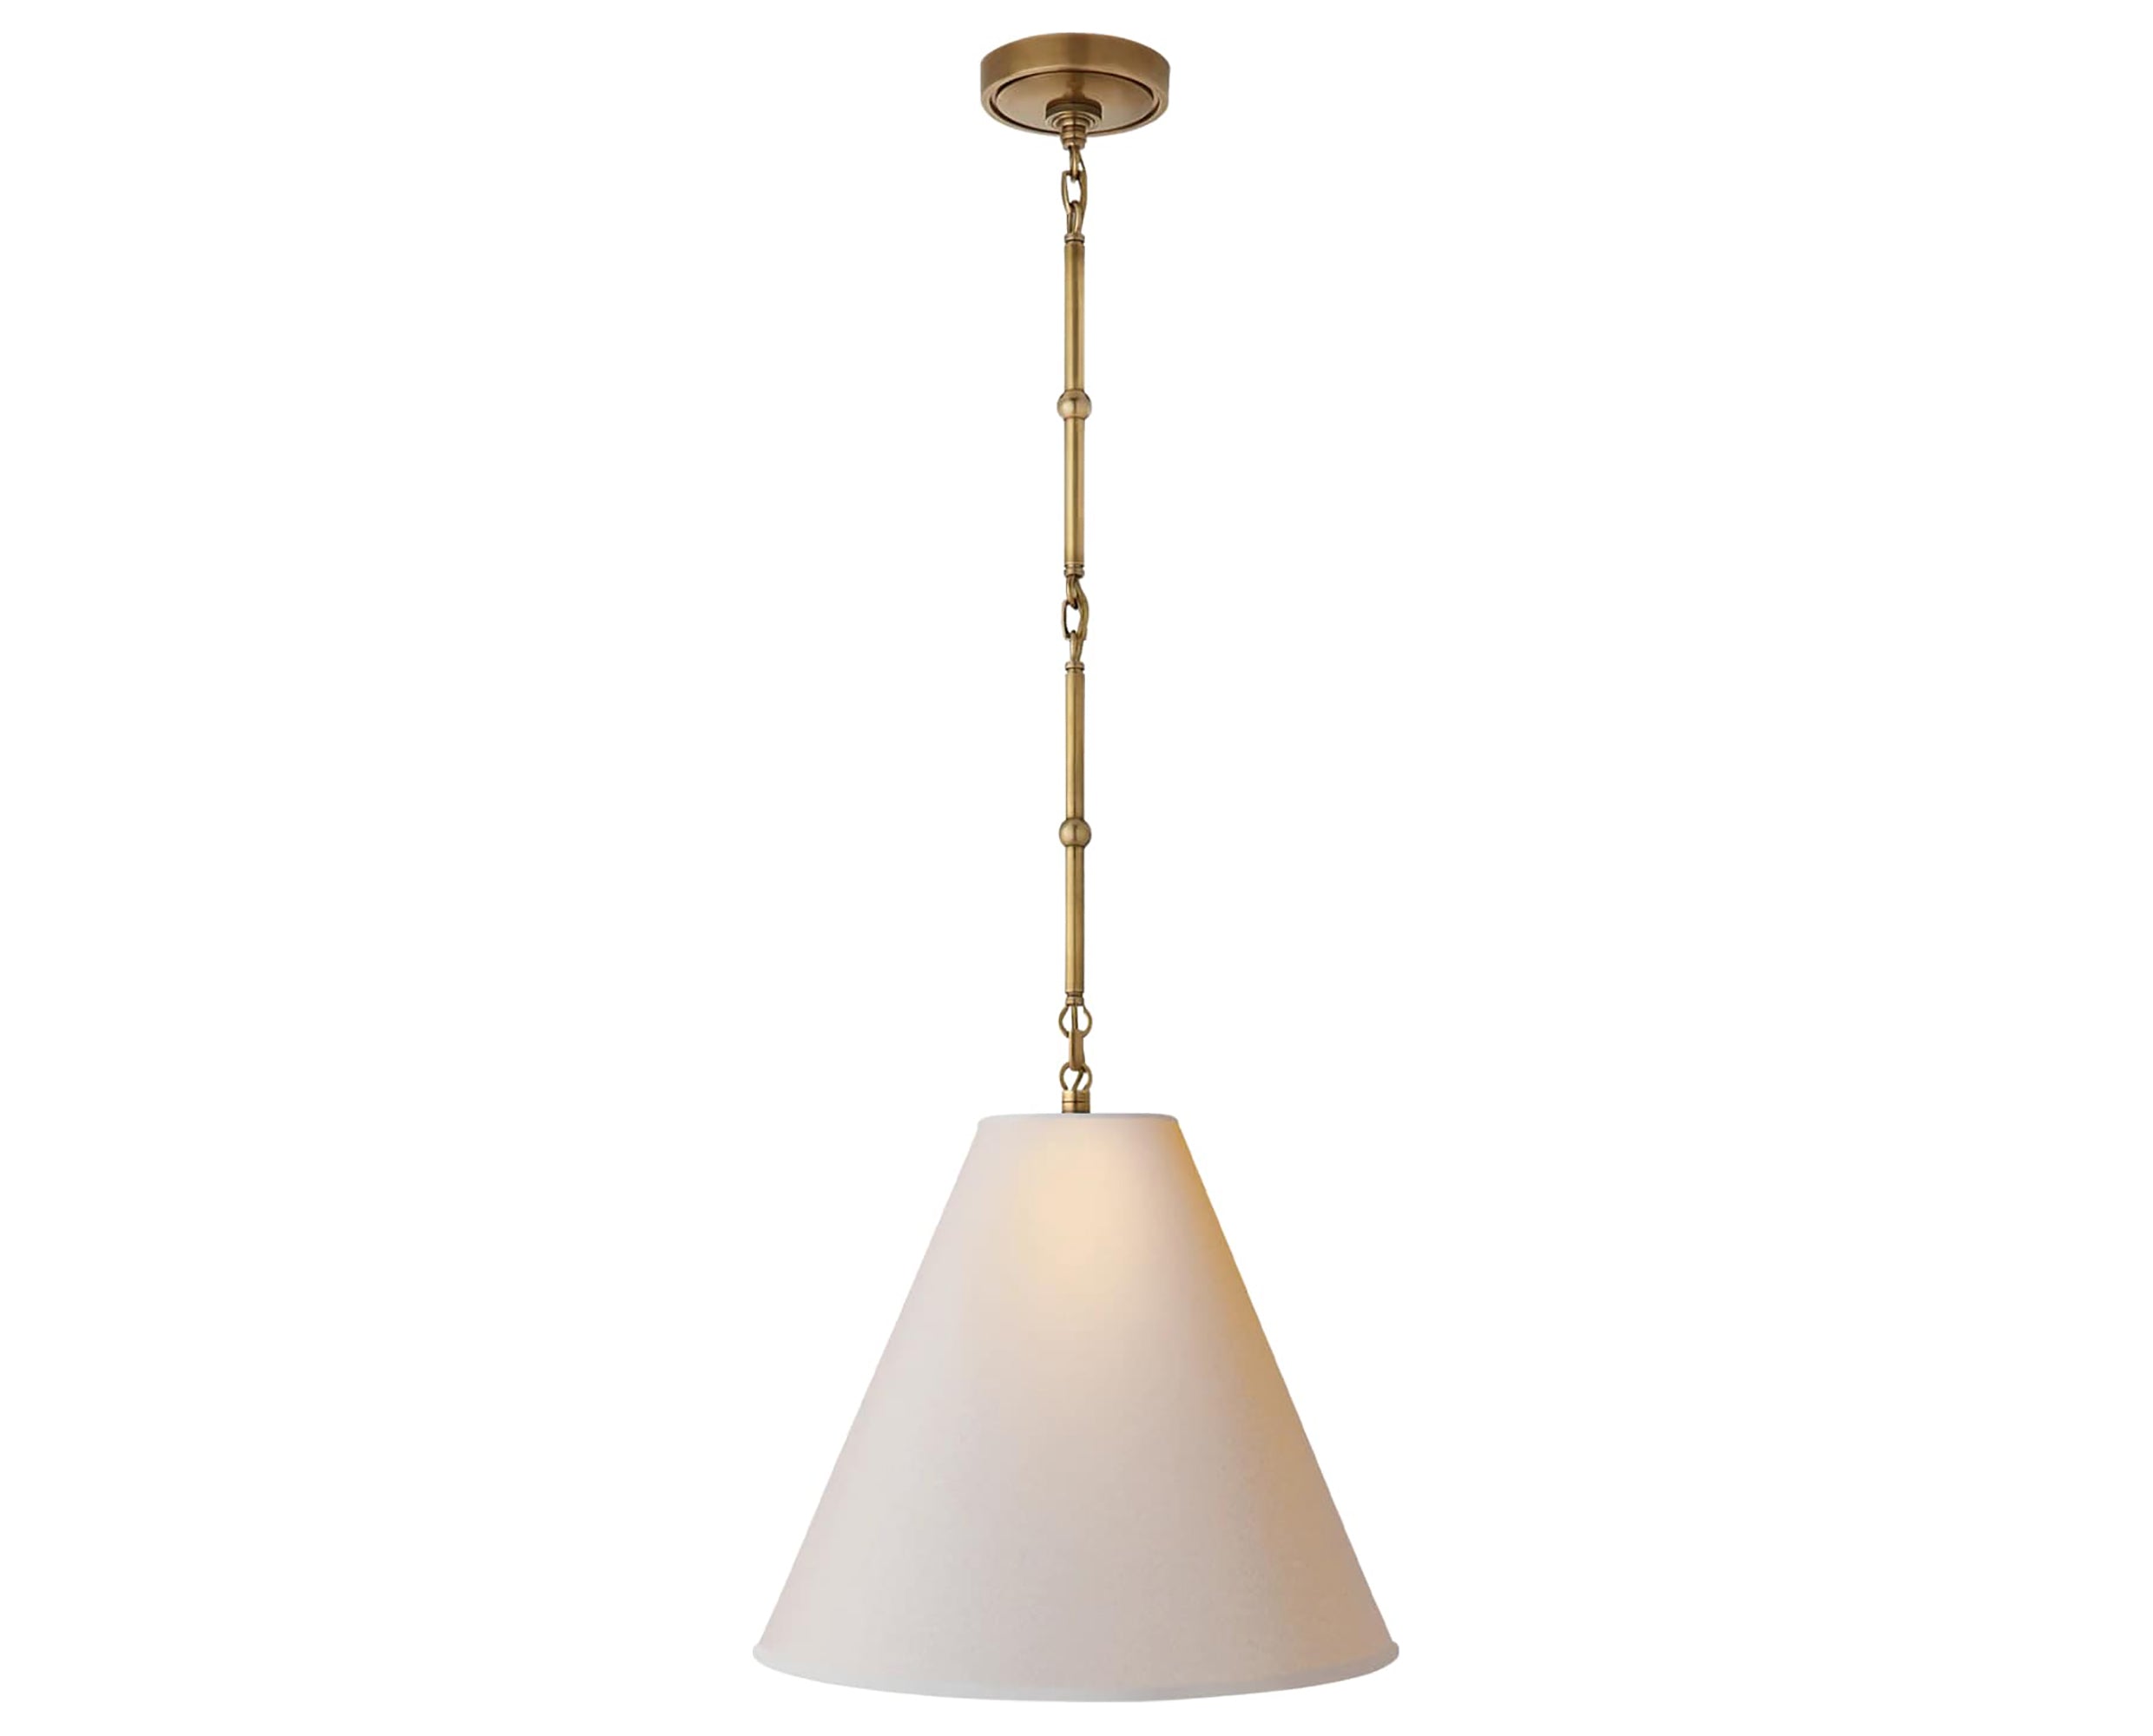 Hand-Rubbed Antique Brass and Natural Paper | Goodman Small Hanging Light | Valley Ridge Furniture